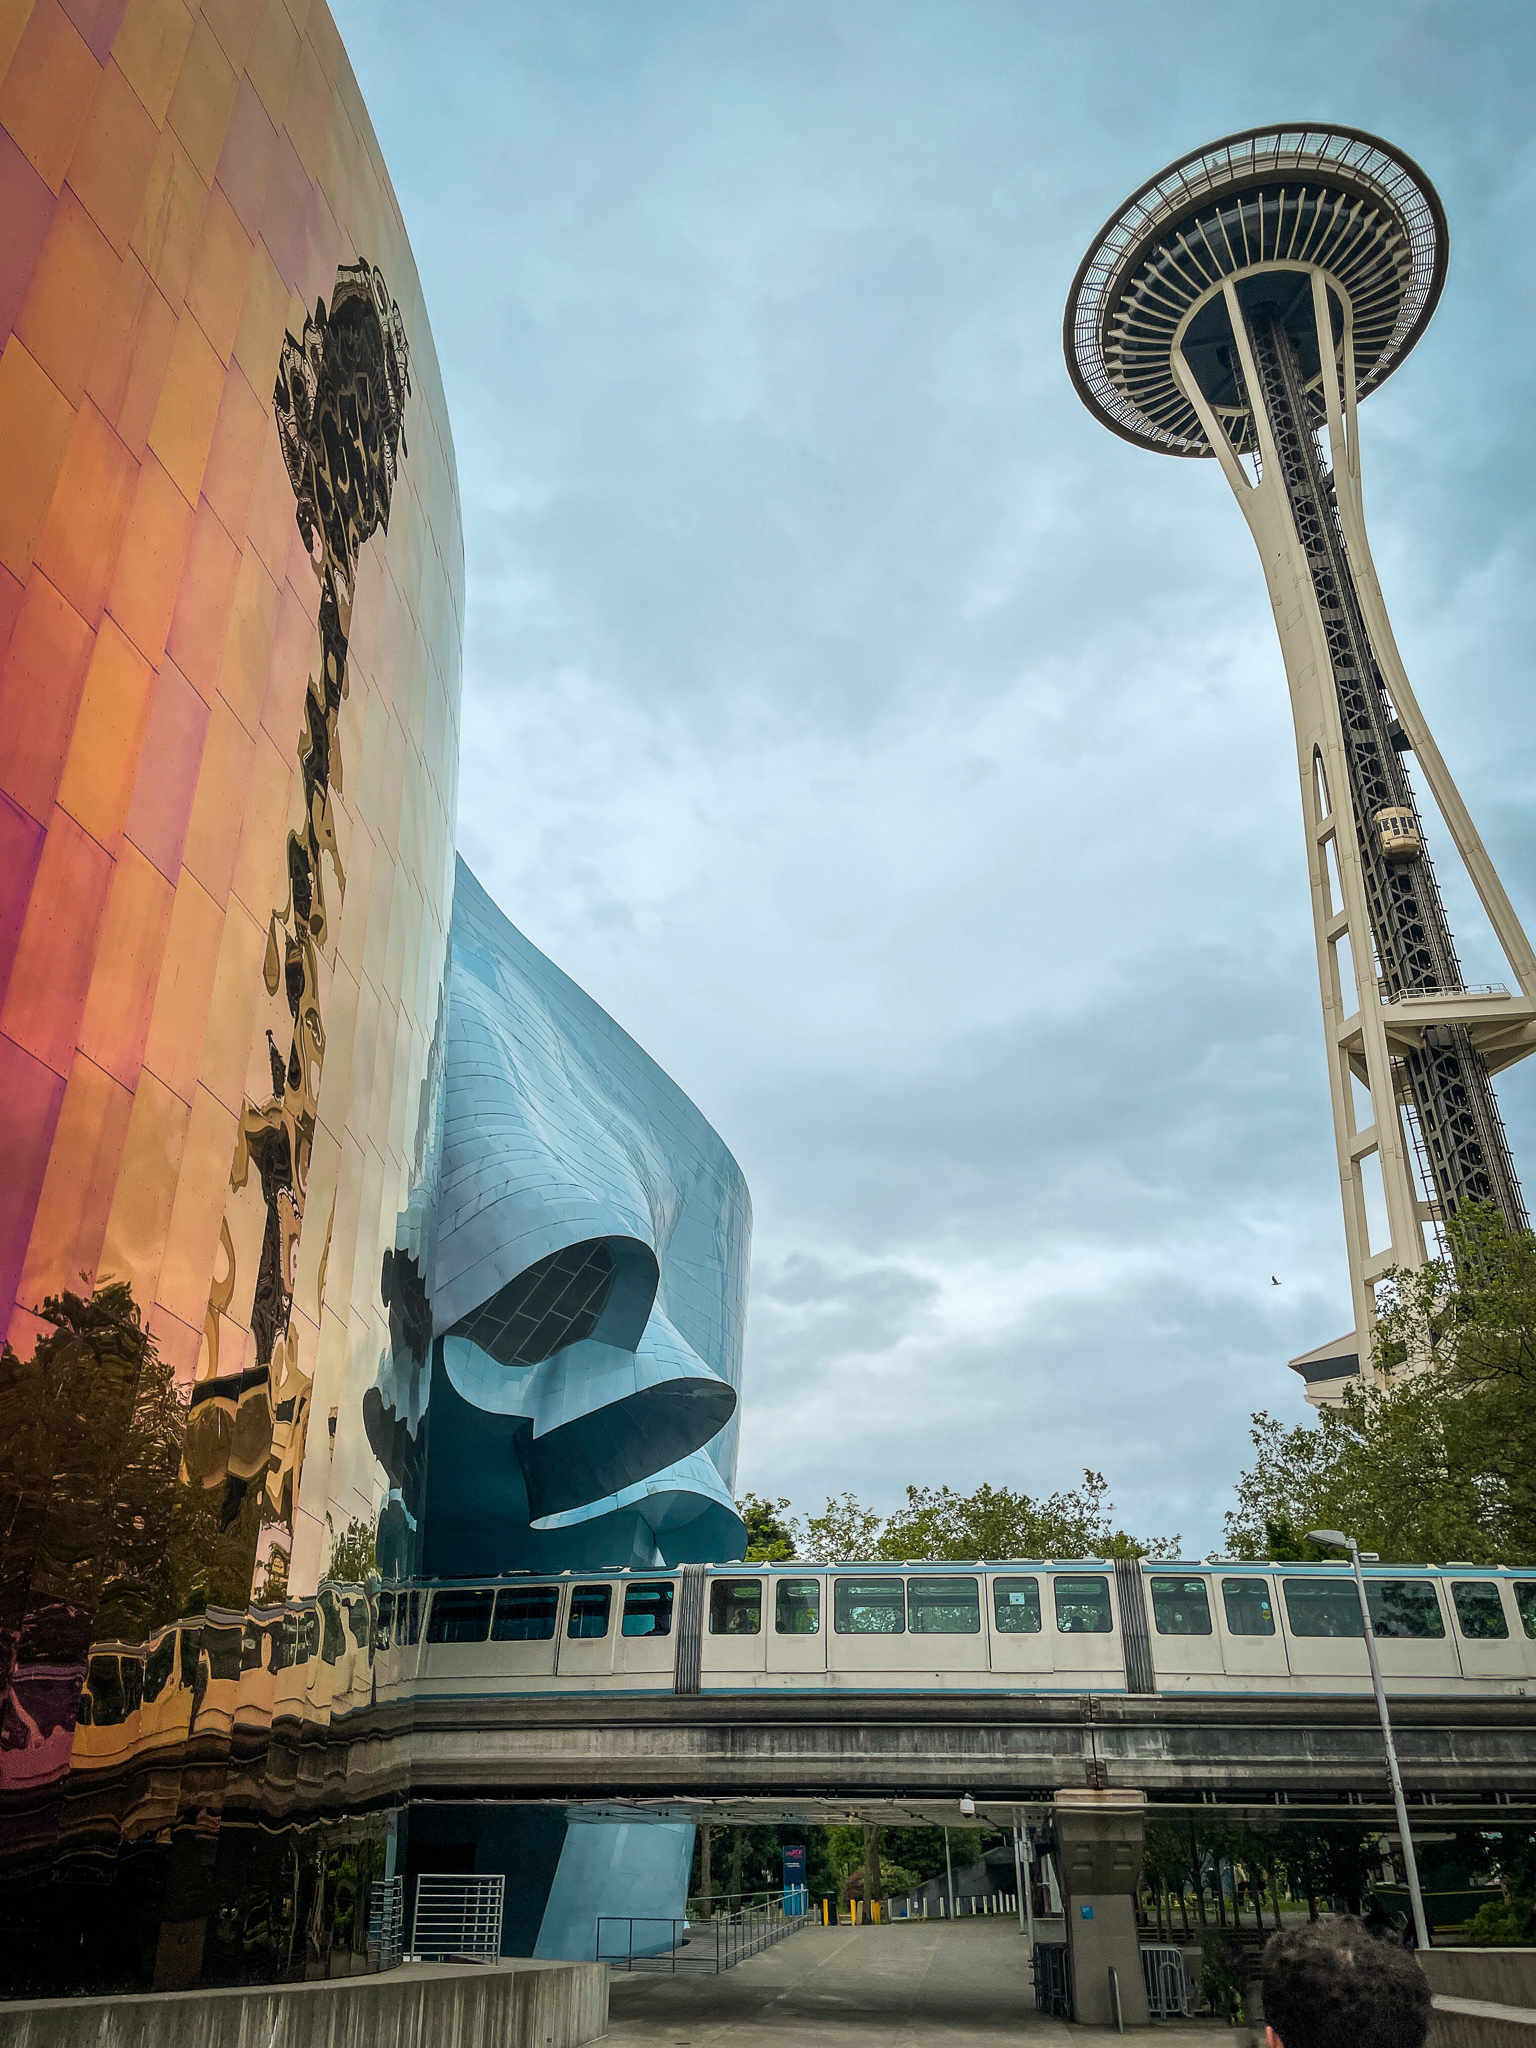 Seattle Space Needle and MoPOP Museum Monorail